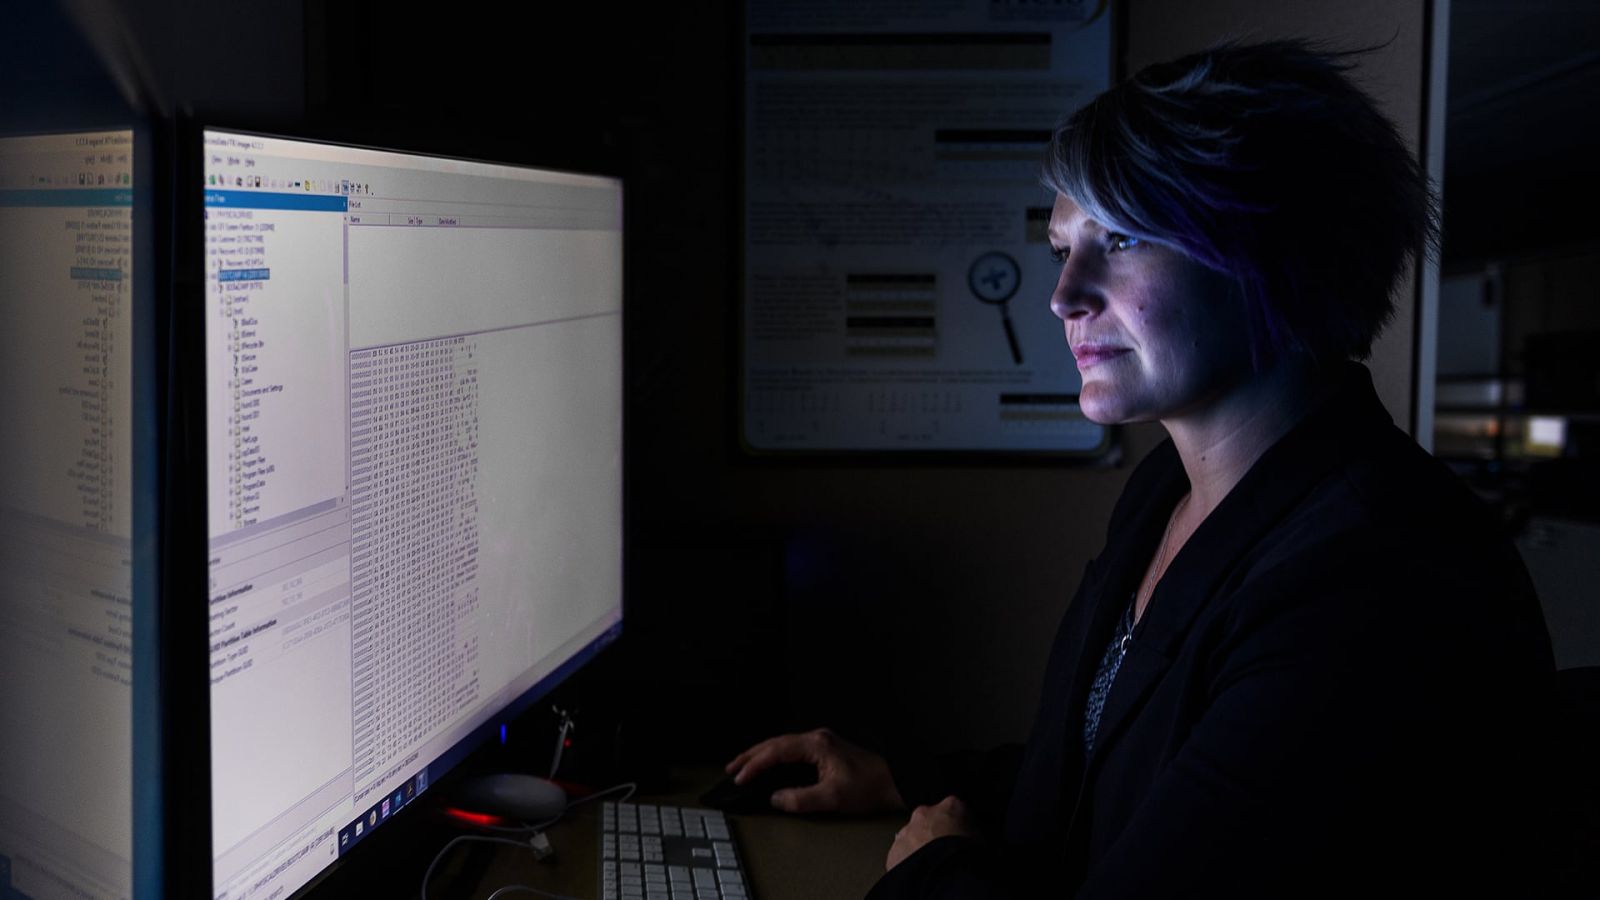 Kathryn Seigfried-Spellar works on a computer in the Tippecanoe County High Tech Crime Unit in Discovery Park. (Photo/Rebecca Wilcox)